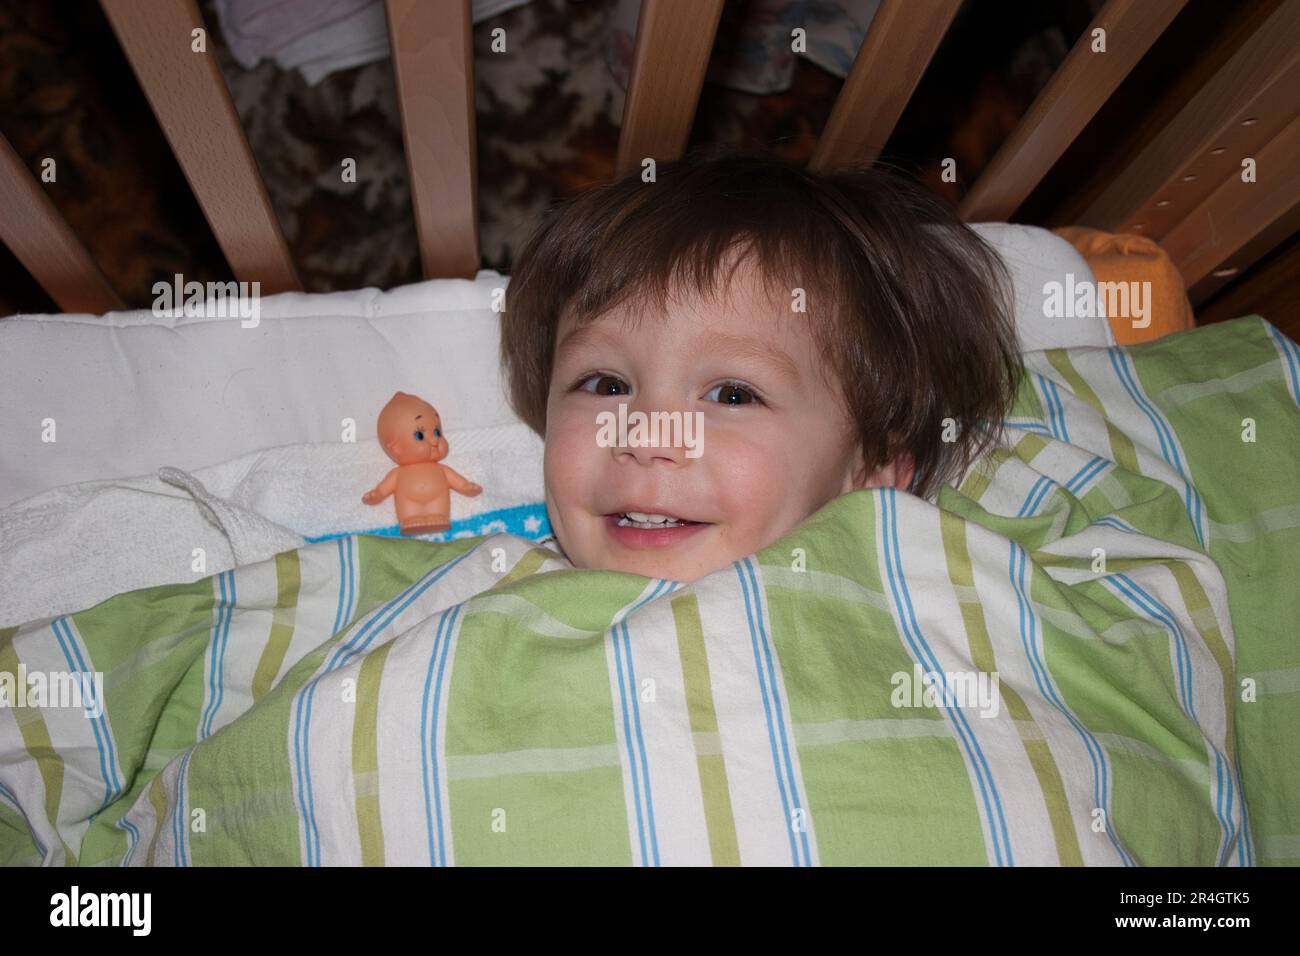 One year old Caucasian child, boy, laying in cot with duvet over him, with his 'friend,' a kewpie doll next to him. Eye-contact. Smiling. Stock Photo